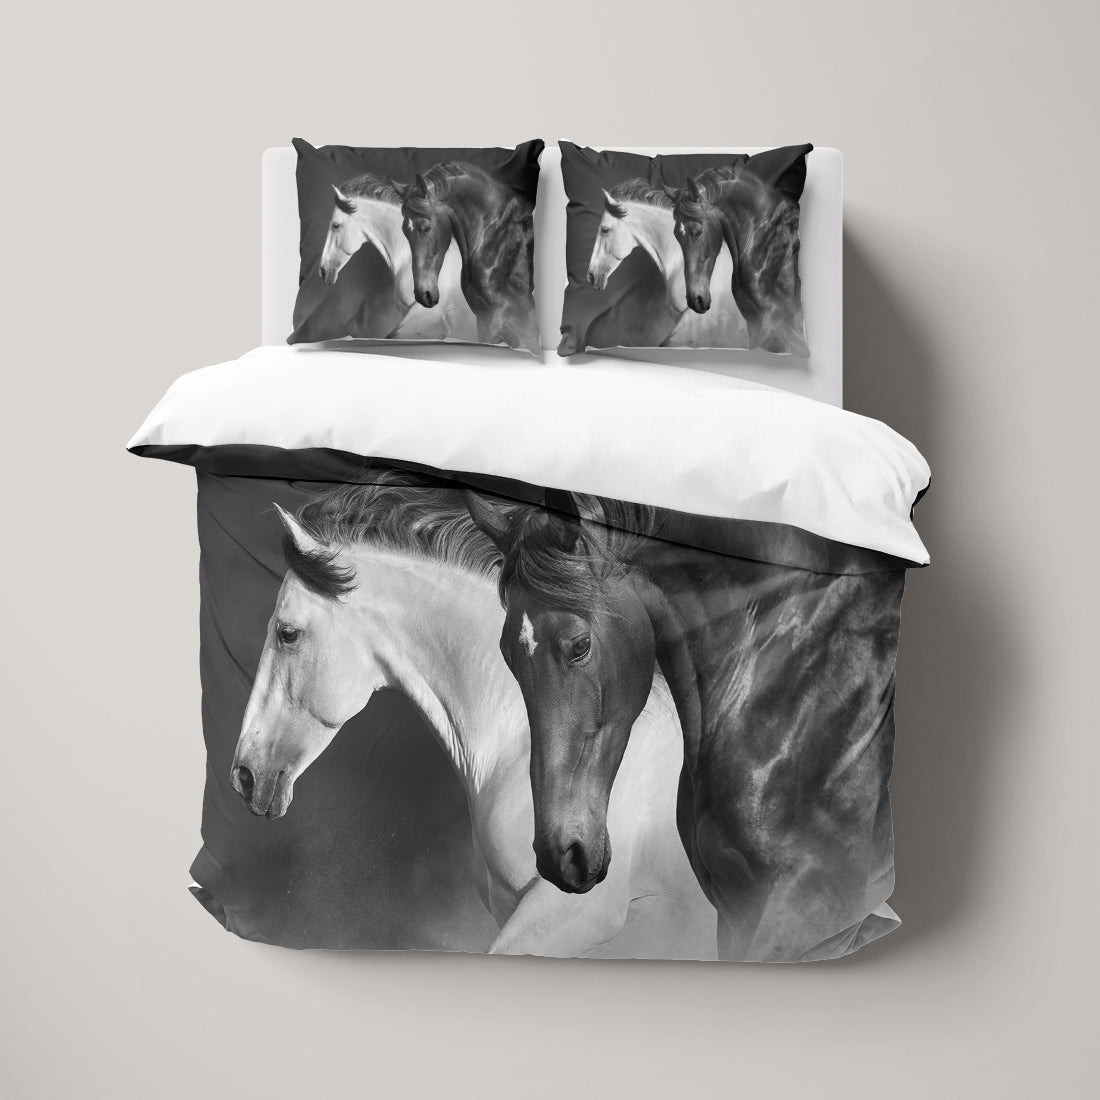 Horses Running Animals Black And White 3D Duvet Cover Set W Pillow Cover, Single Double Queen King Size, Printed Cotton Quilt Doona Cover